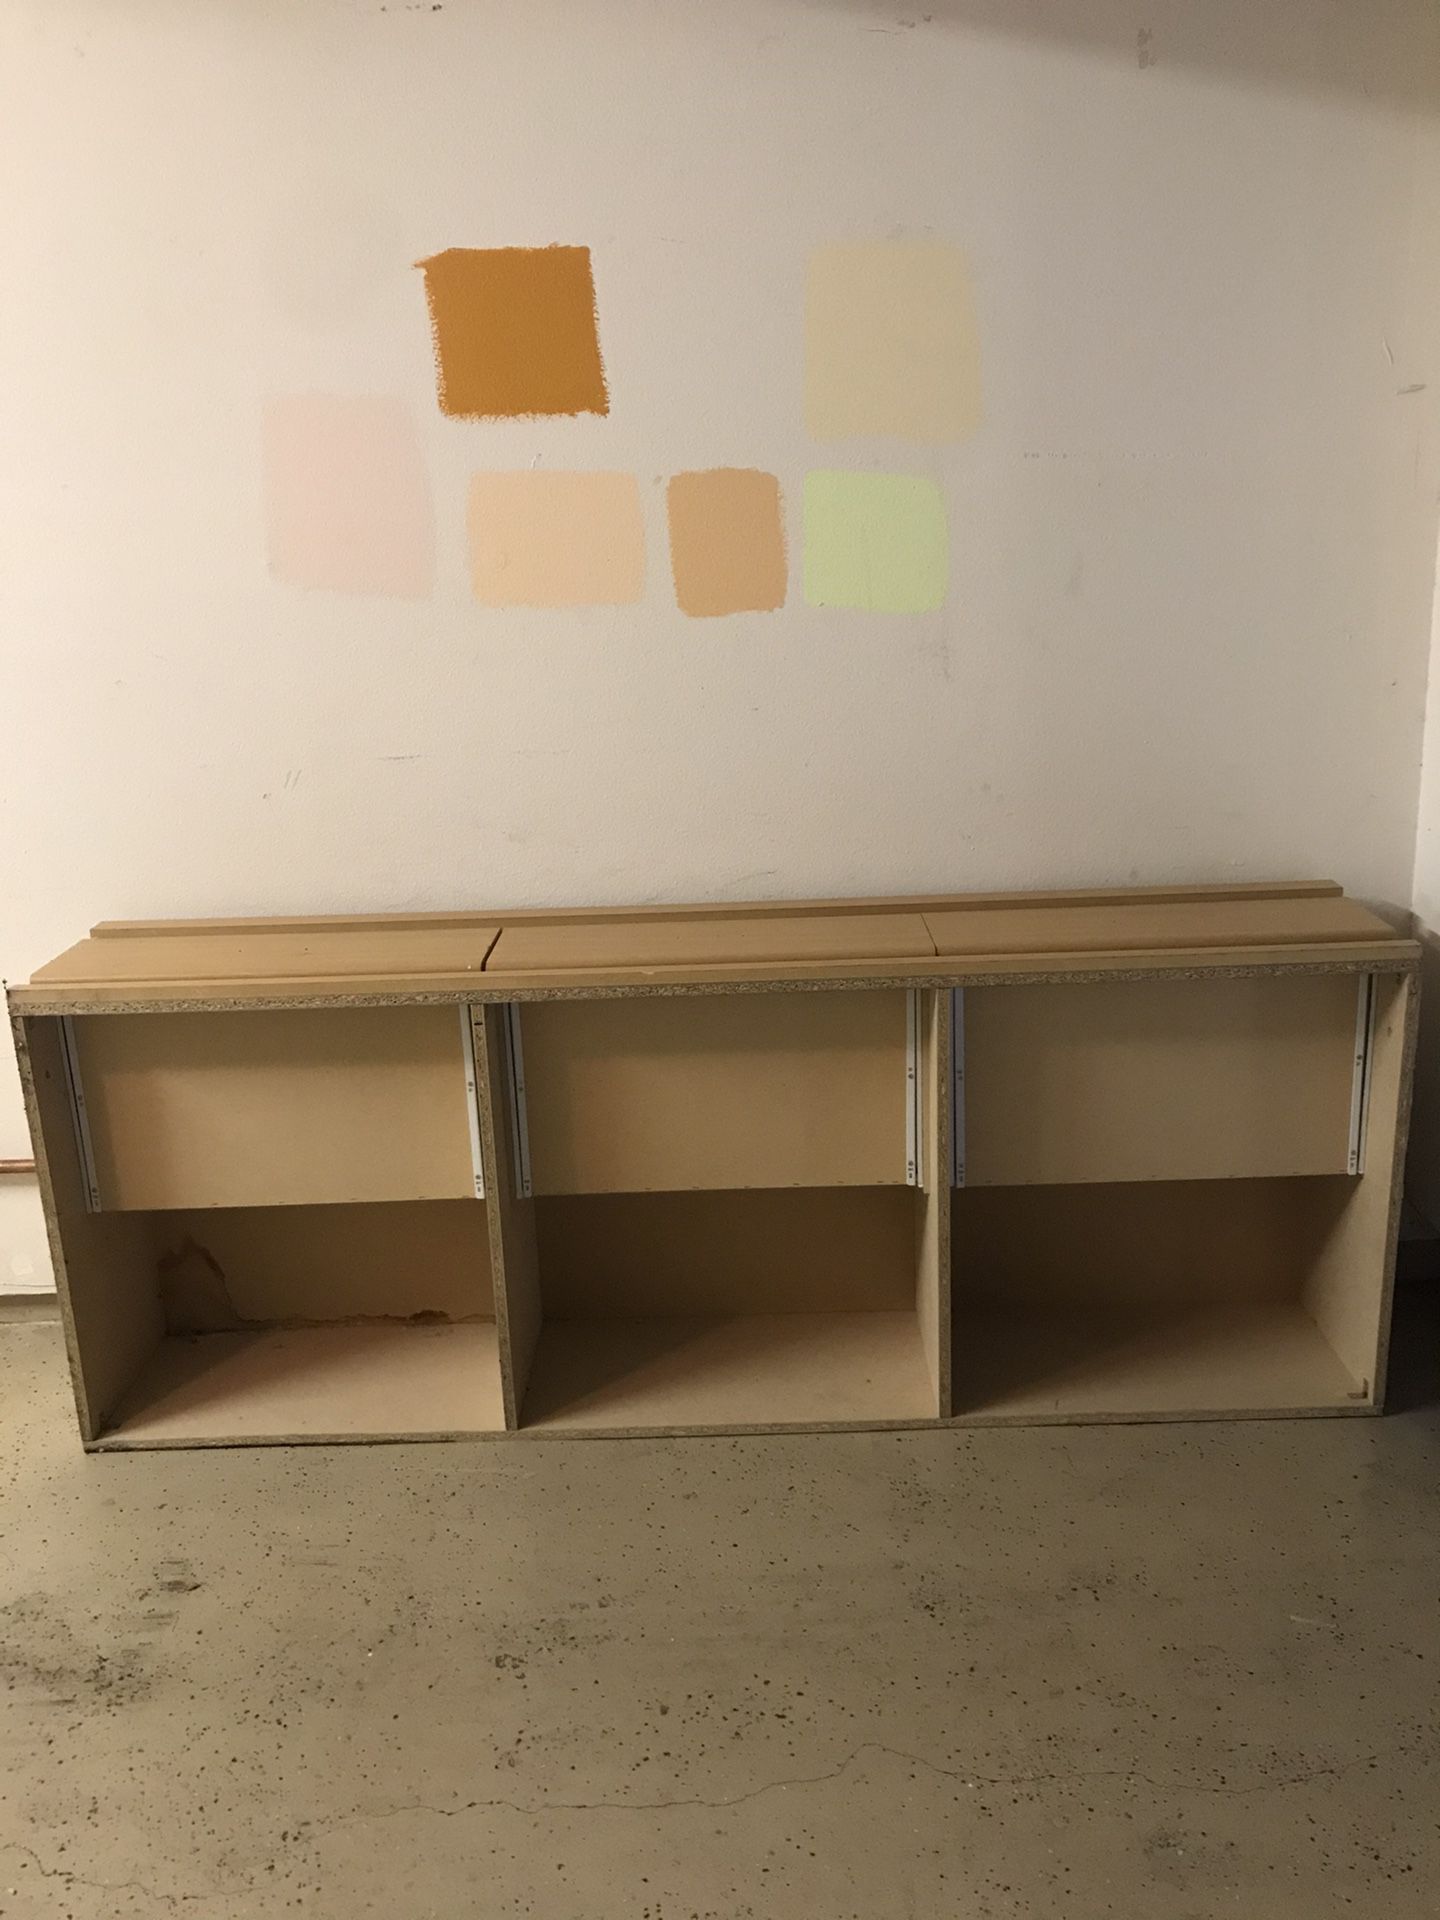 Partial box bed with drawers FREE!